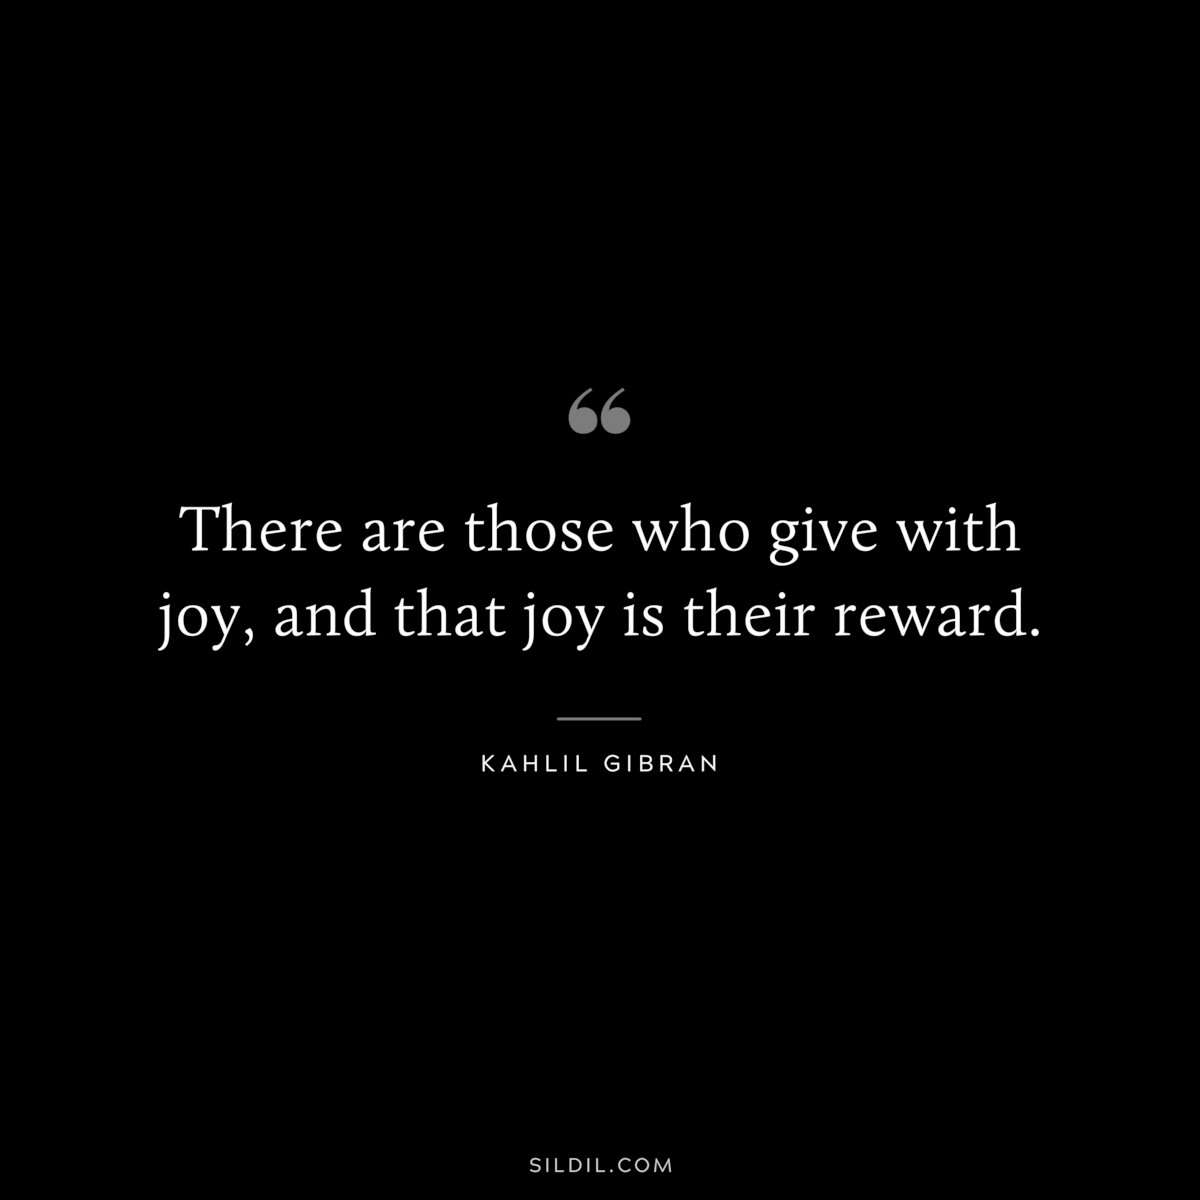 There are those who give with joy, and that joy is their reward. ― Kahlil Gibran